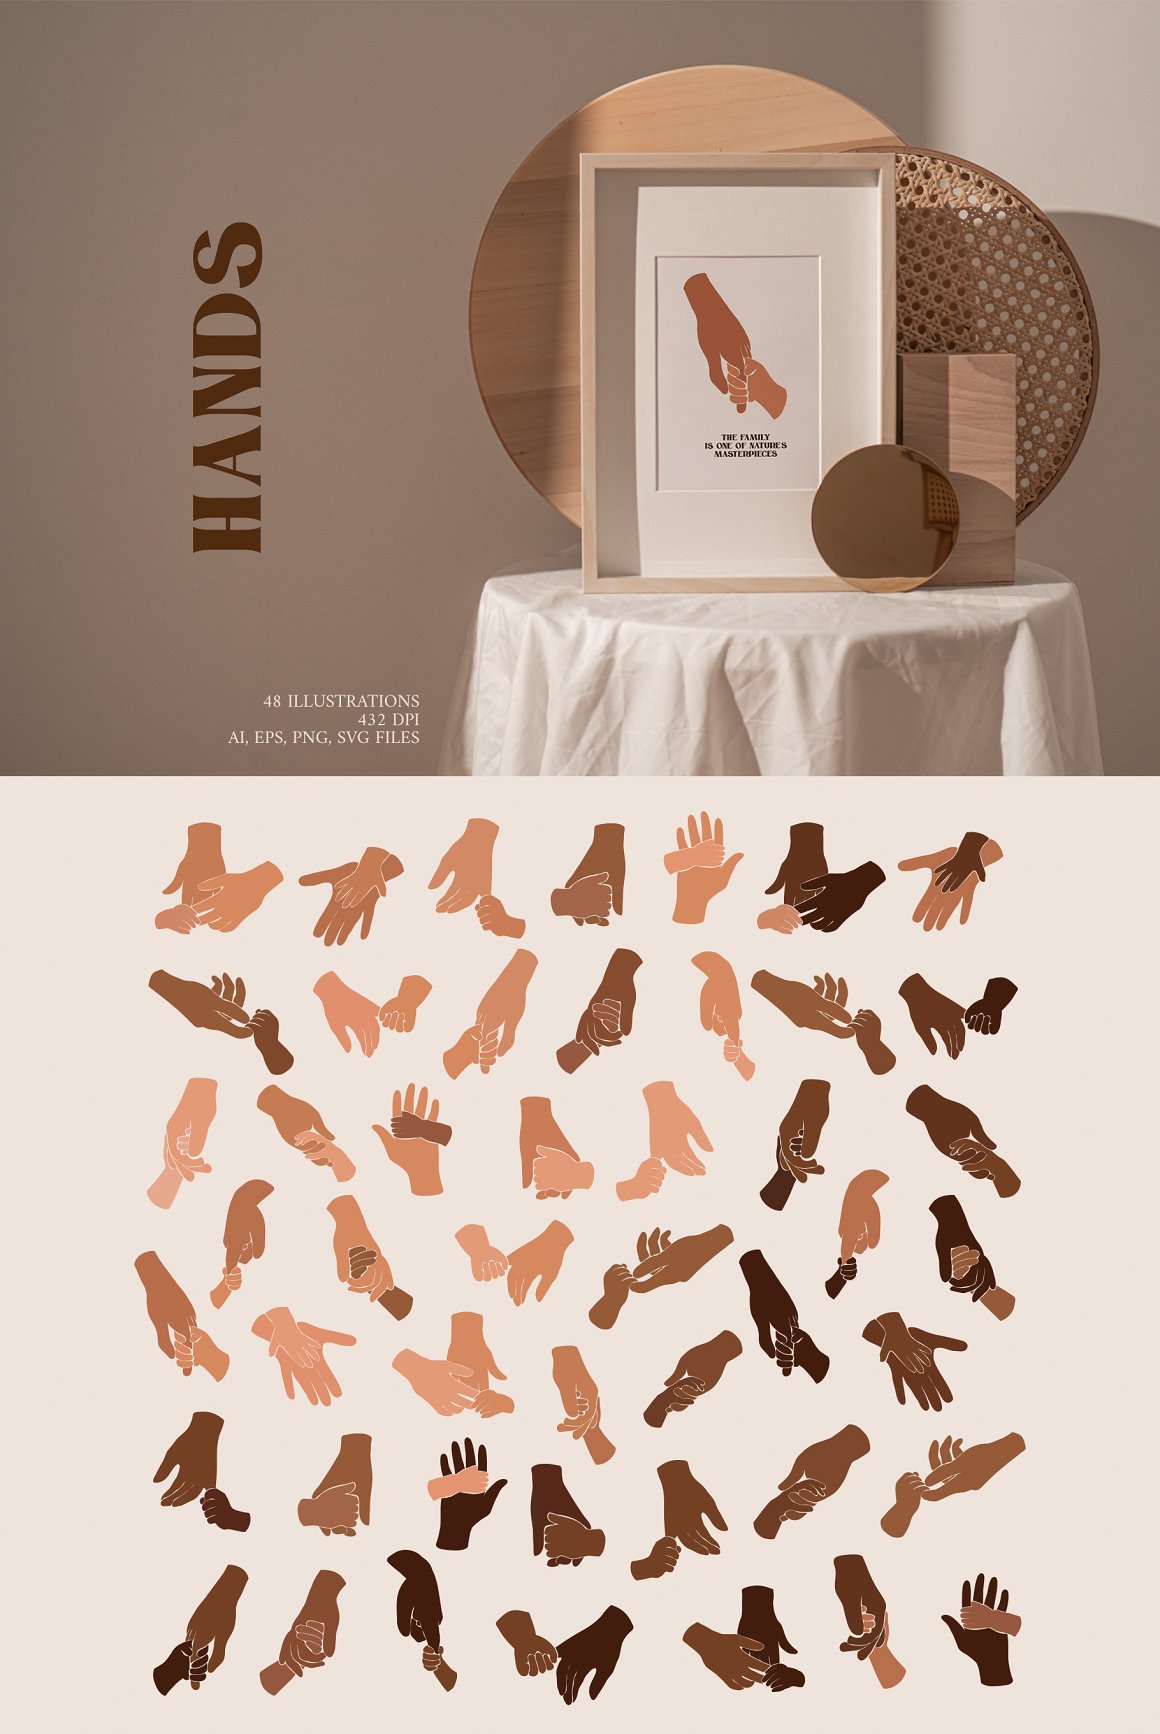 Collection of 24 different hands illustrations.